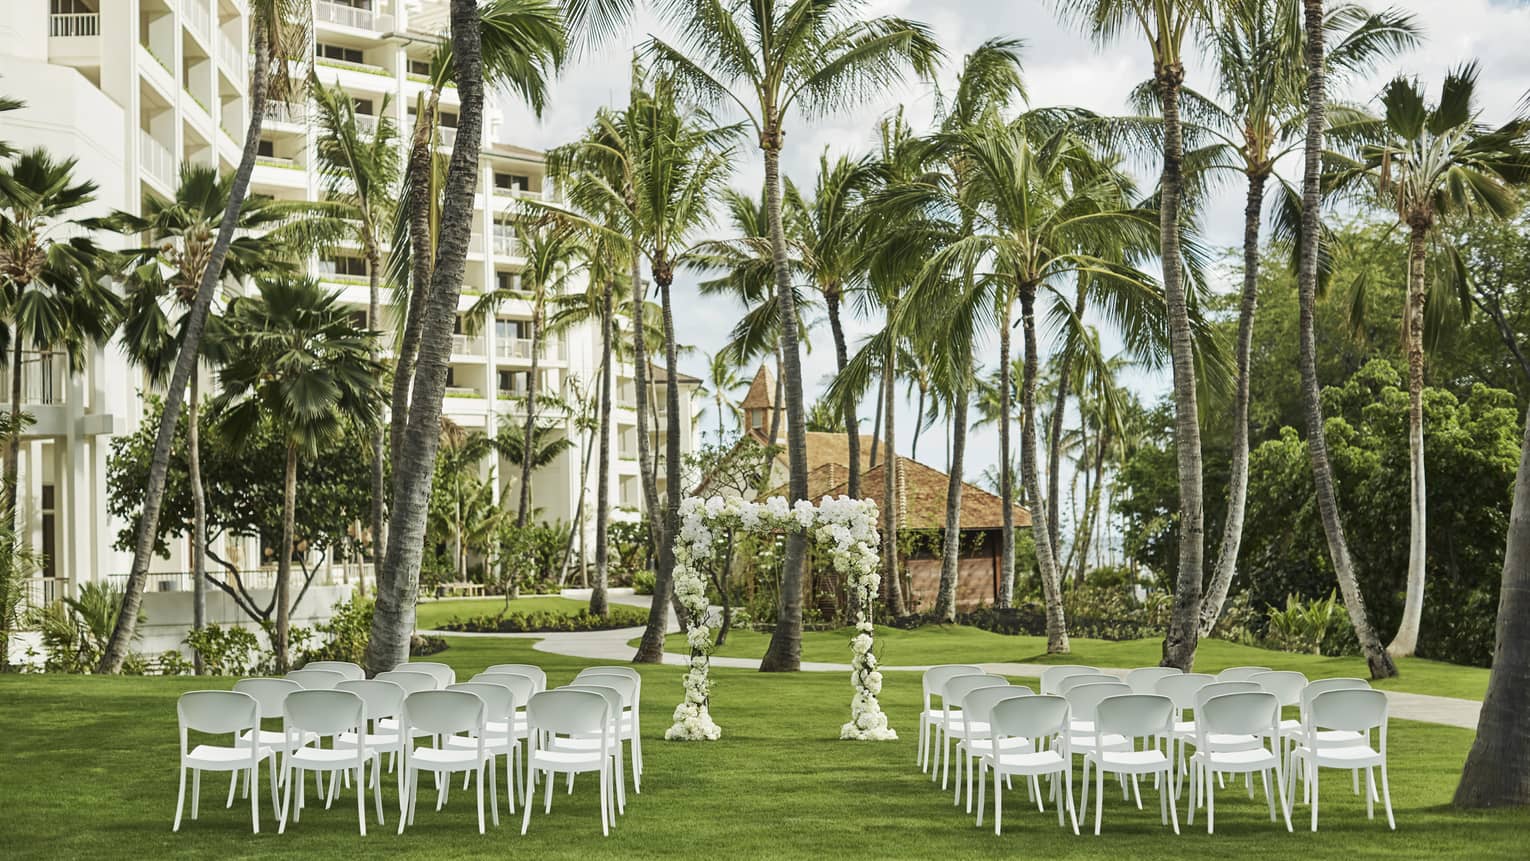 Outdoor wedding reception on event lawn, rows of white chairs face altar beneath palm trees